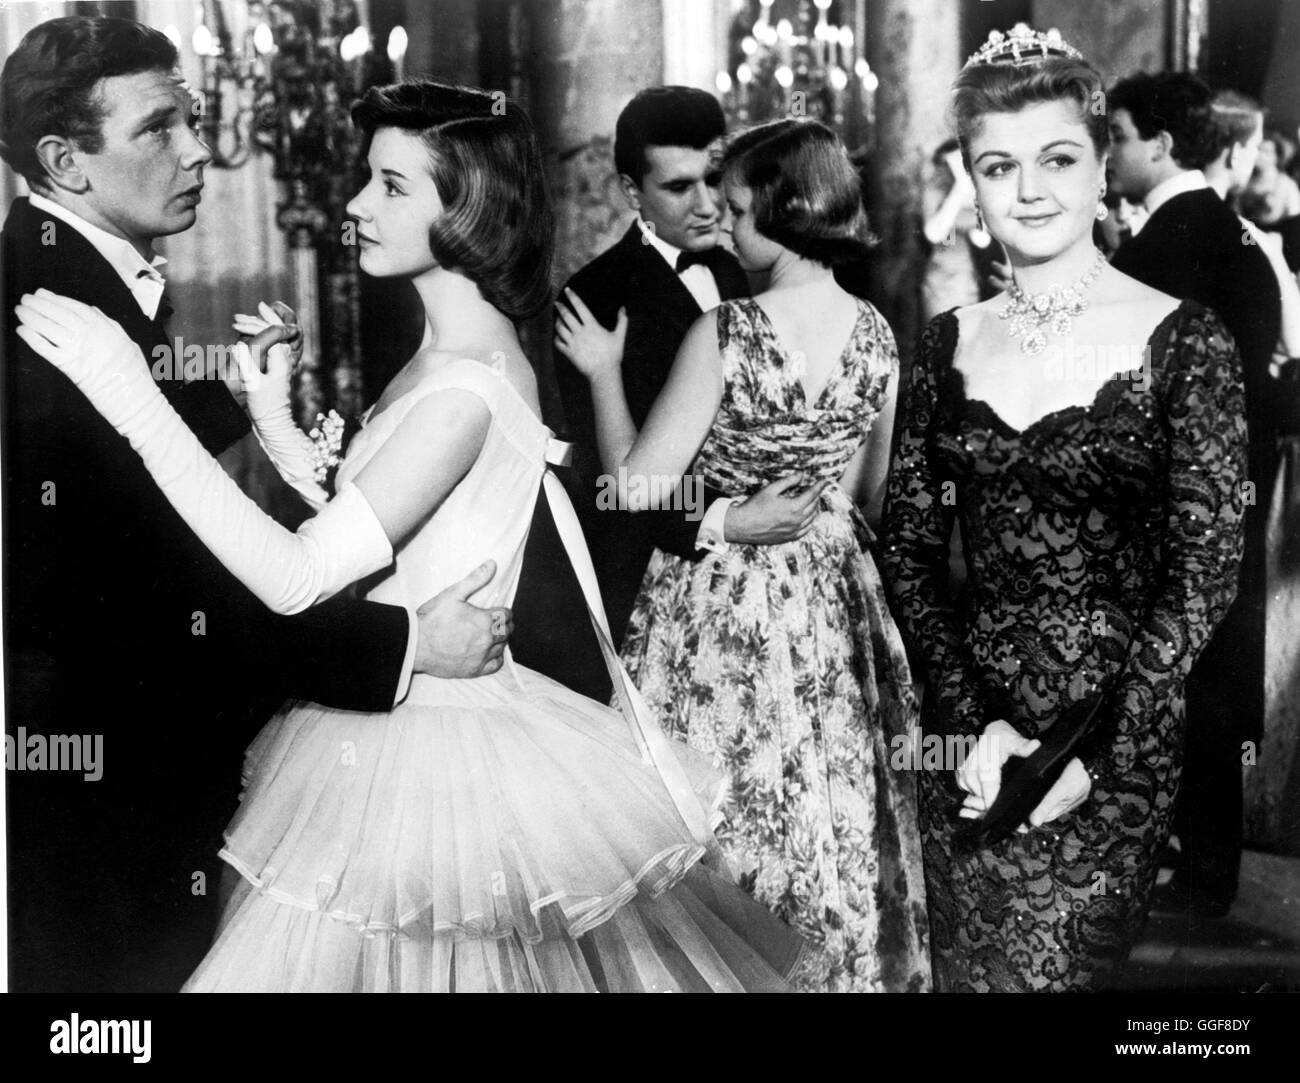 WAS WEIß MAMA VON LIEBE? / The Reluctant Debutante USA 1958 / Vincente Minelli PETER MYERS, DIANE CLARE, ANGELA LANSBURY, 'The Reluctant Debutante', 1958.  Regie: Vincente Minelli aka. The Reluctant Debutante Stock Photo